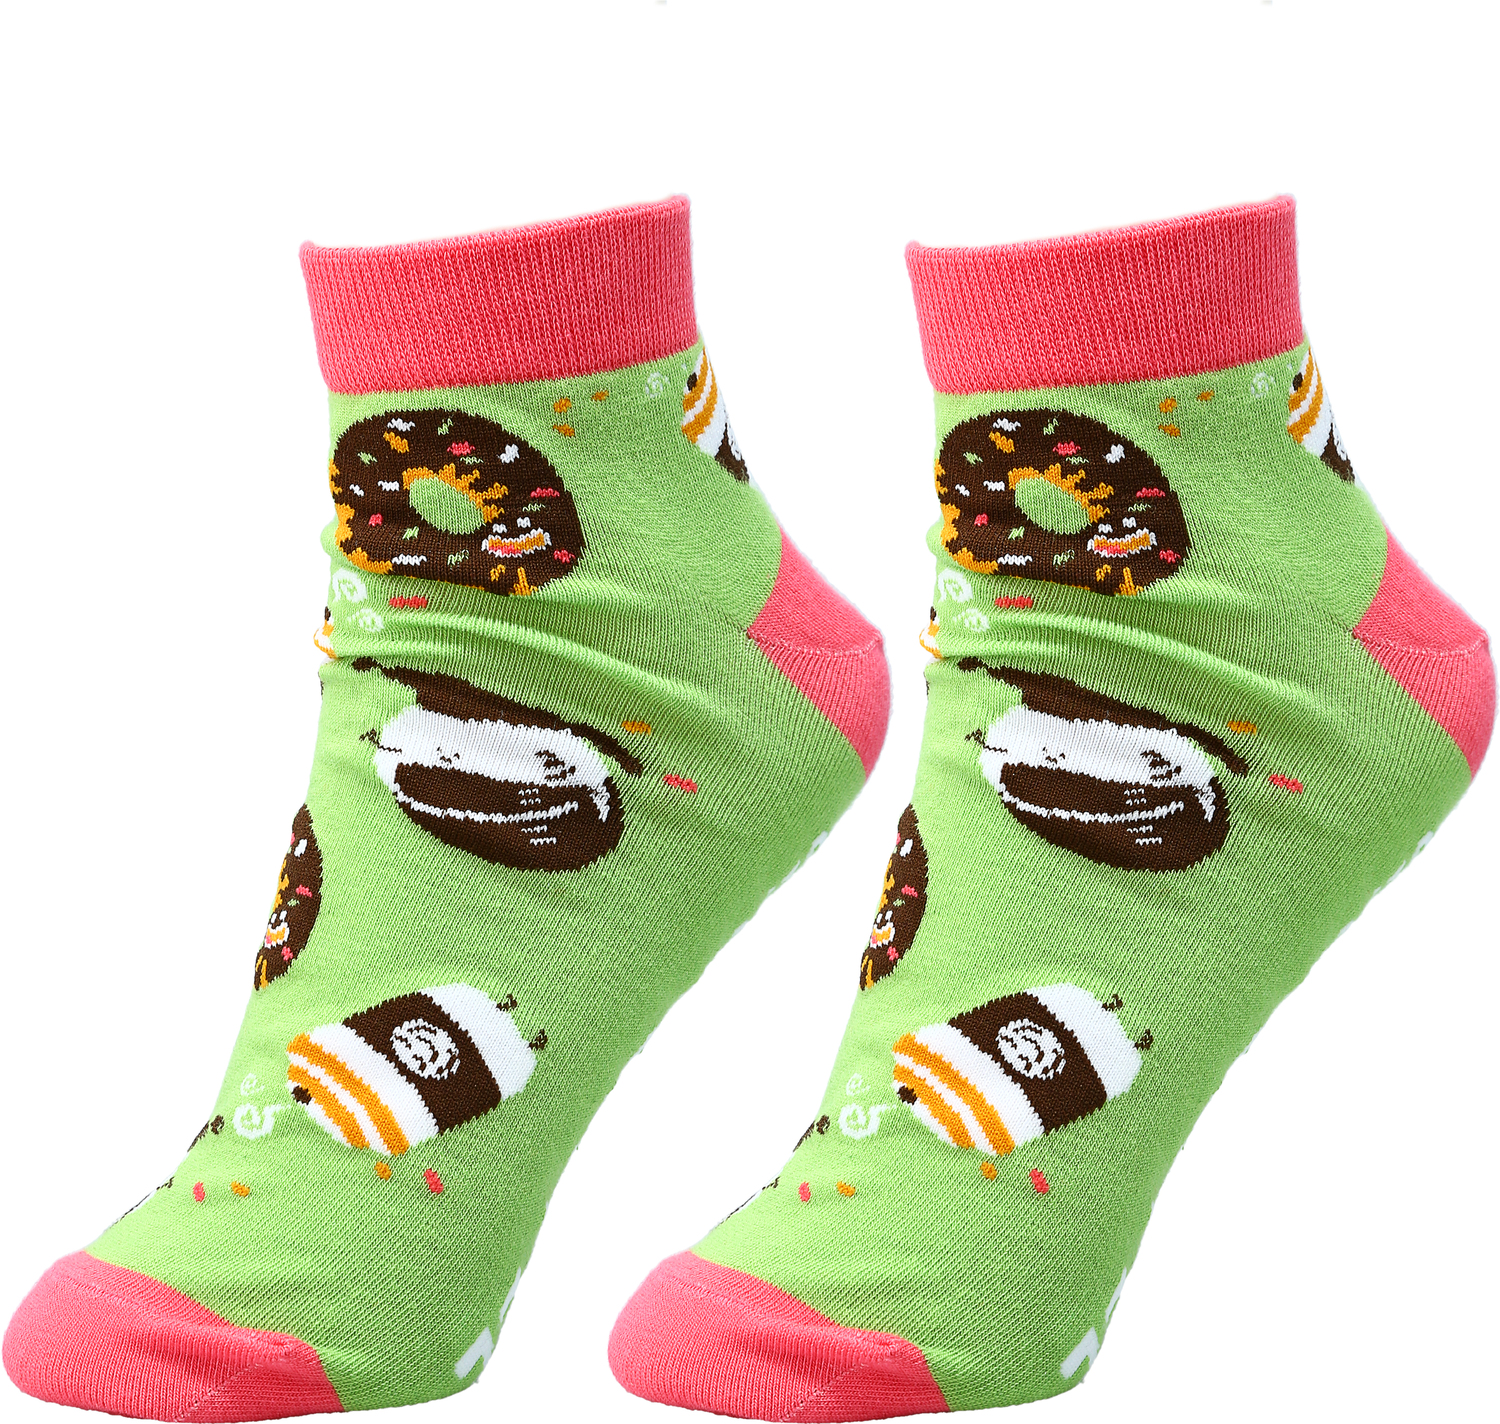 Donut and Coffee by Late Night Snacks - Donut and Coffee - Cotton Blend Ankle Socks